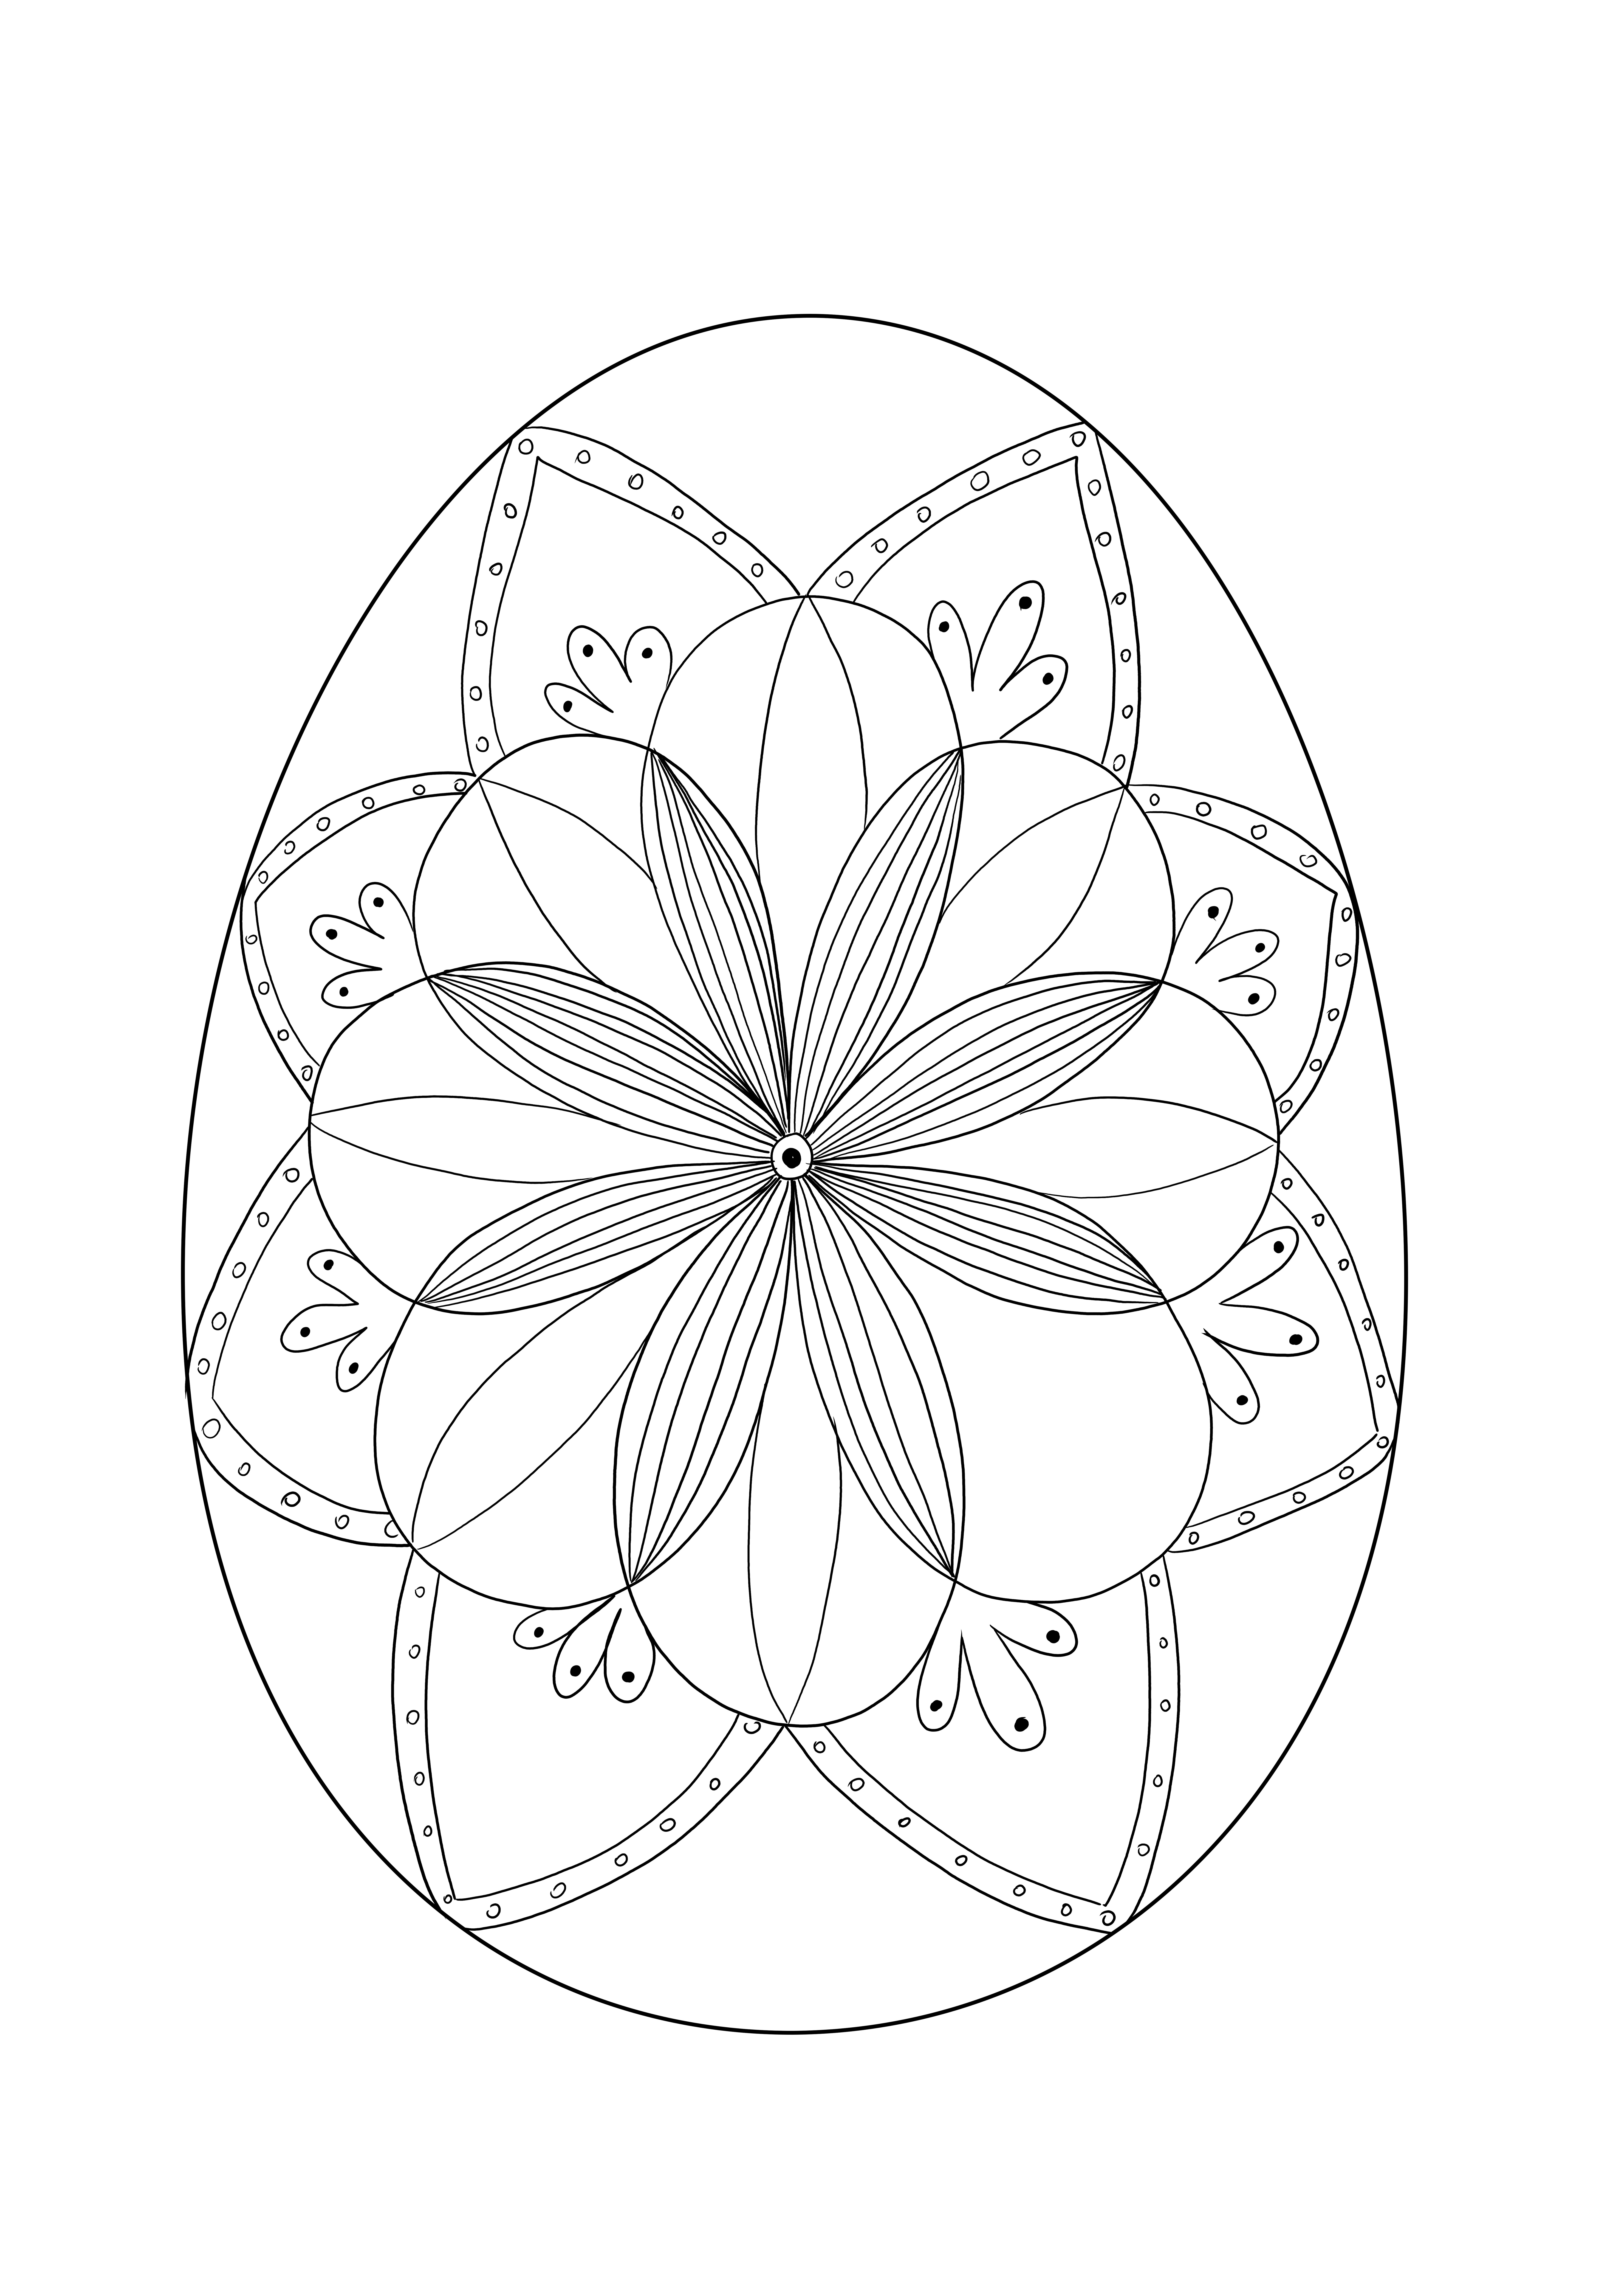 Intricate Easter Egg coloring page for free printing for kids of all ages